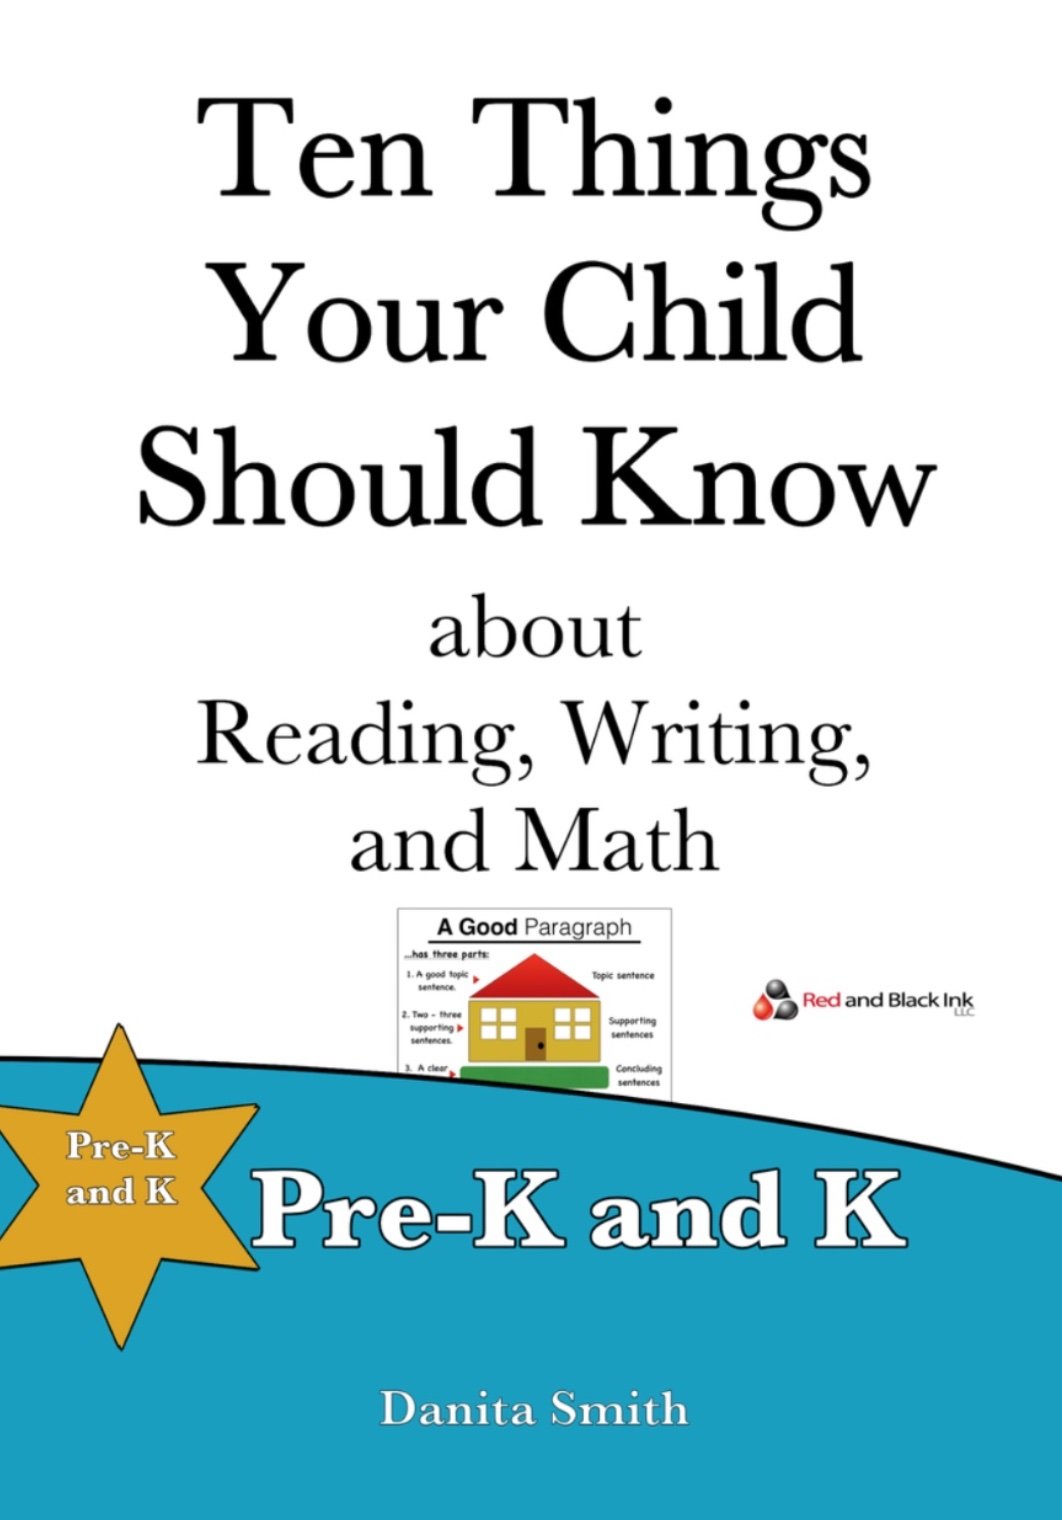 Pre-K and Kindergarten Ten Things Your Child Should Know.jpg